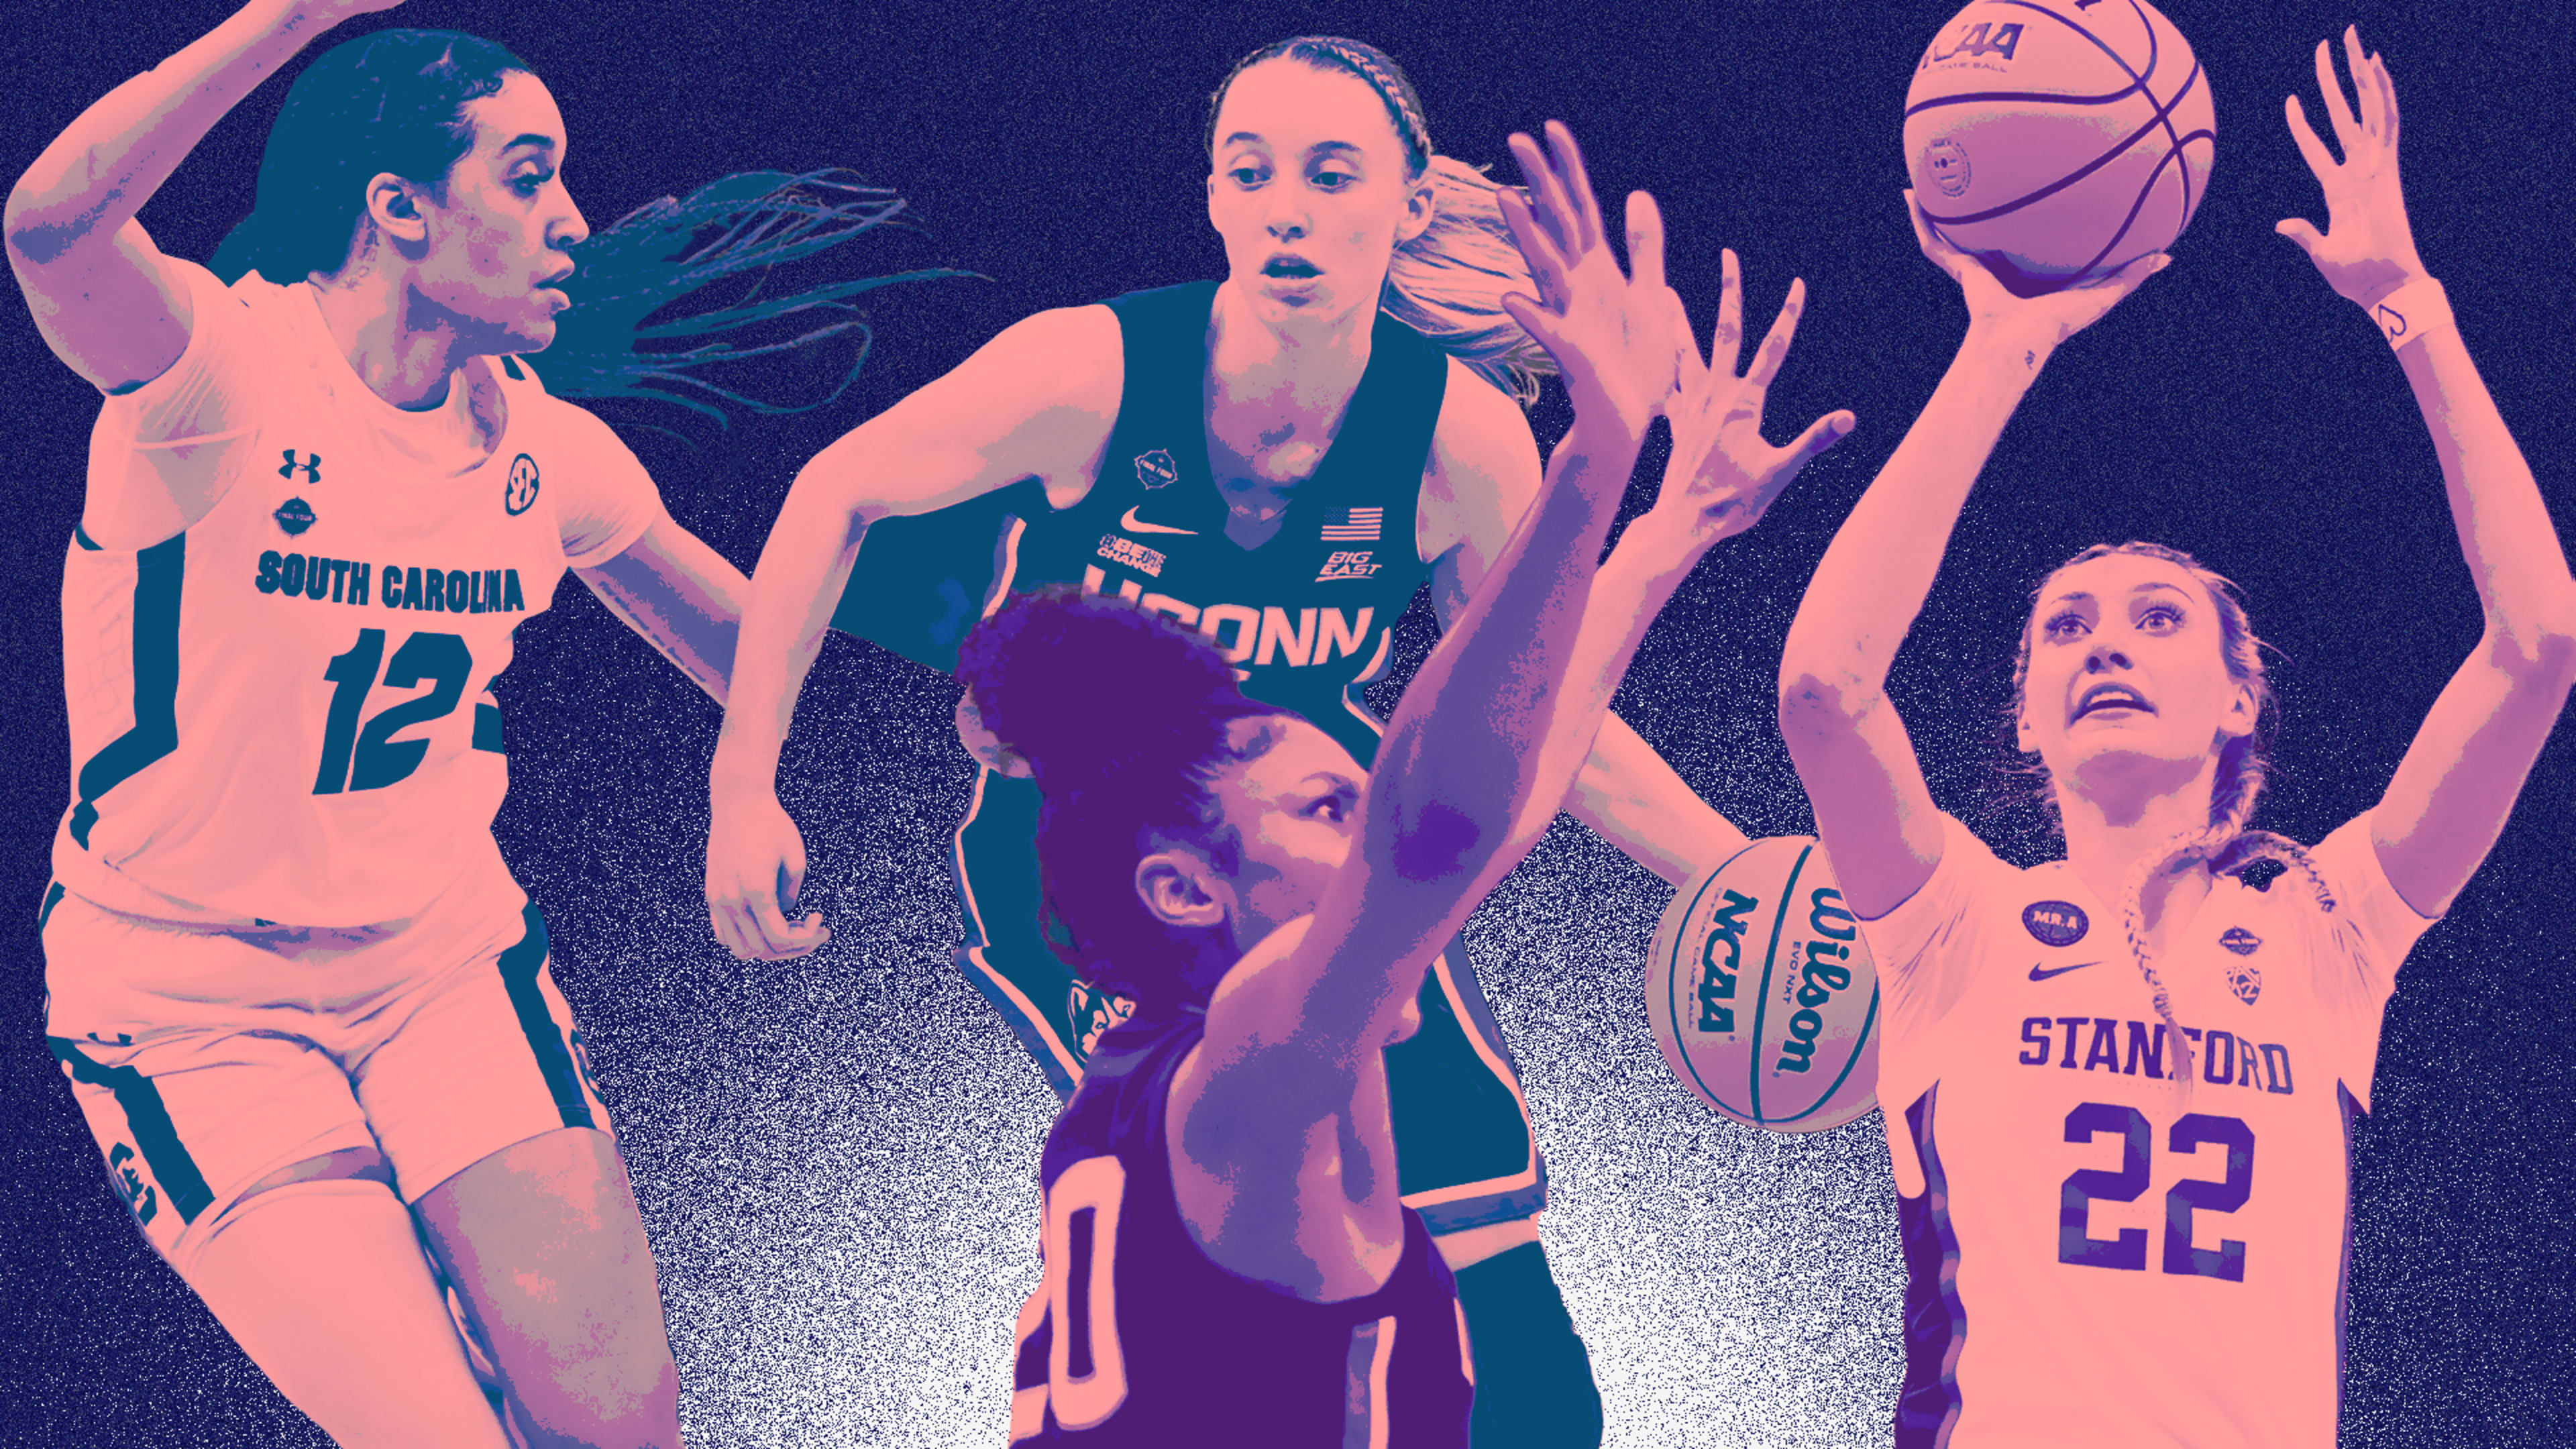 In the wake of March Madness, it’s time to invest in women athletes